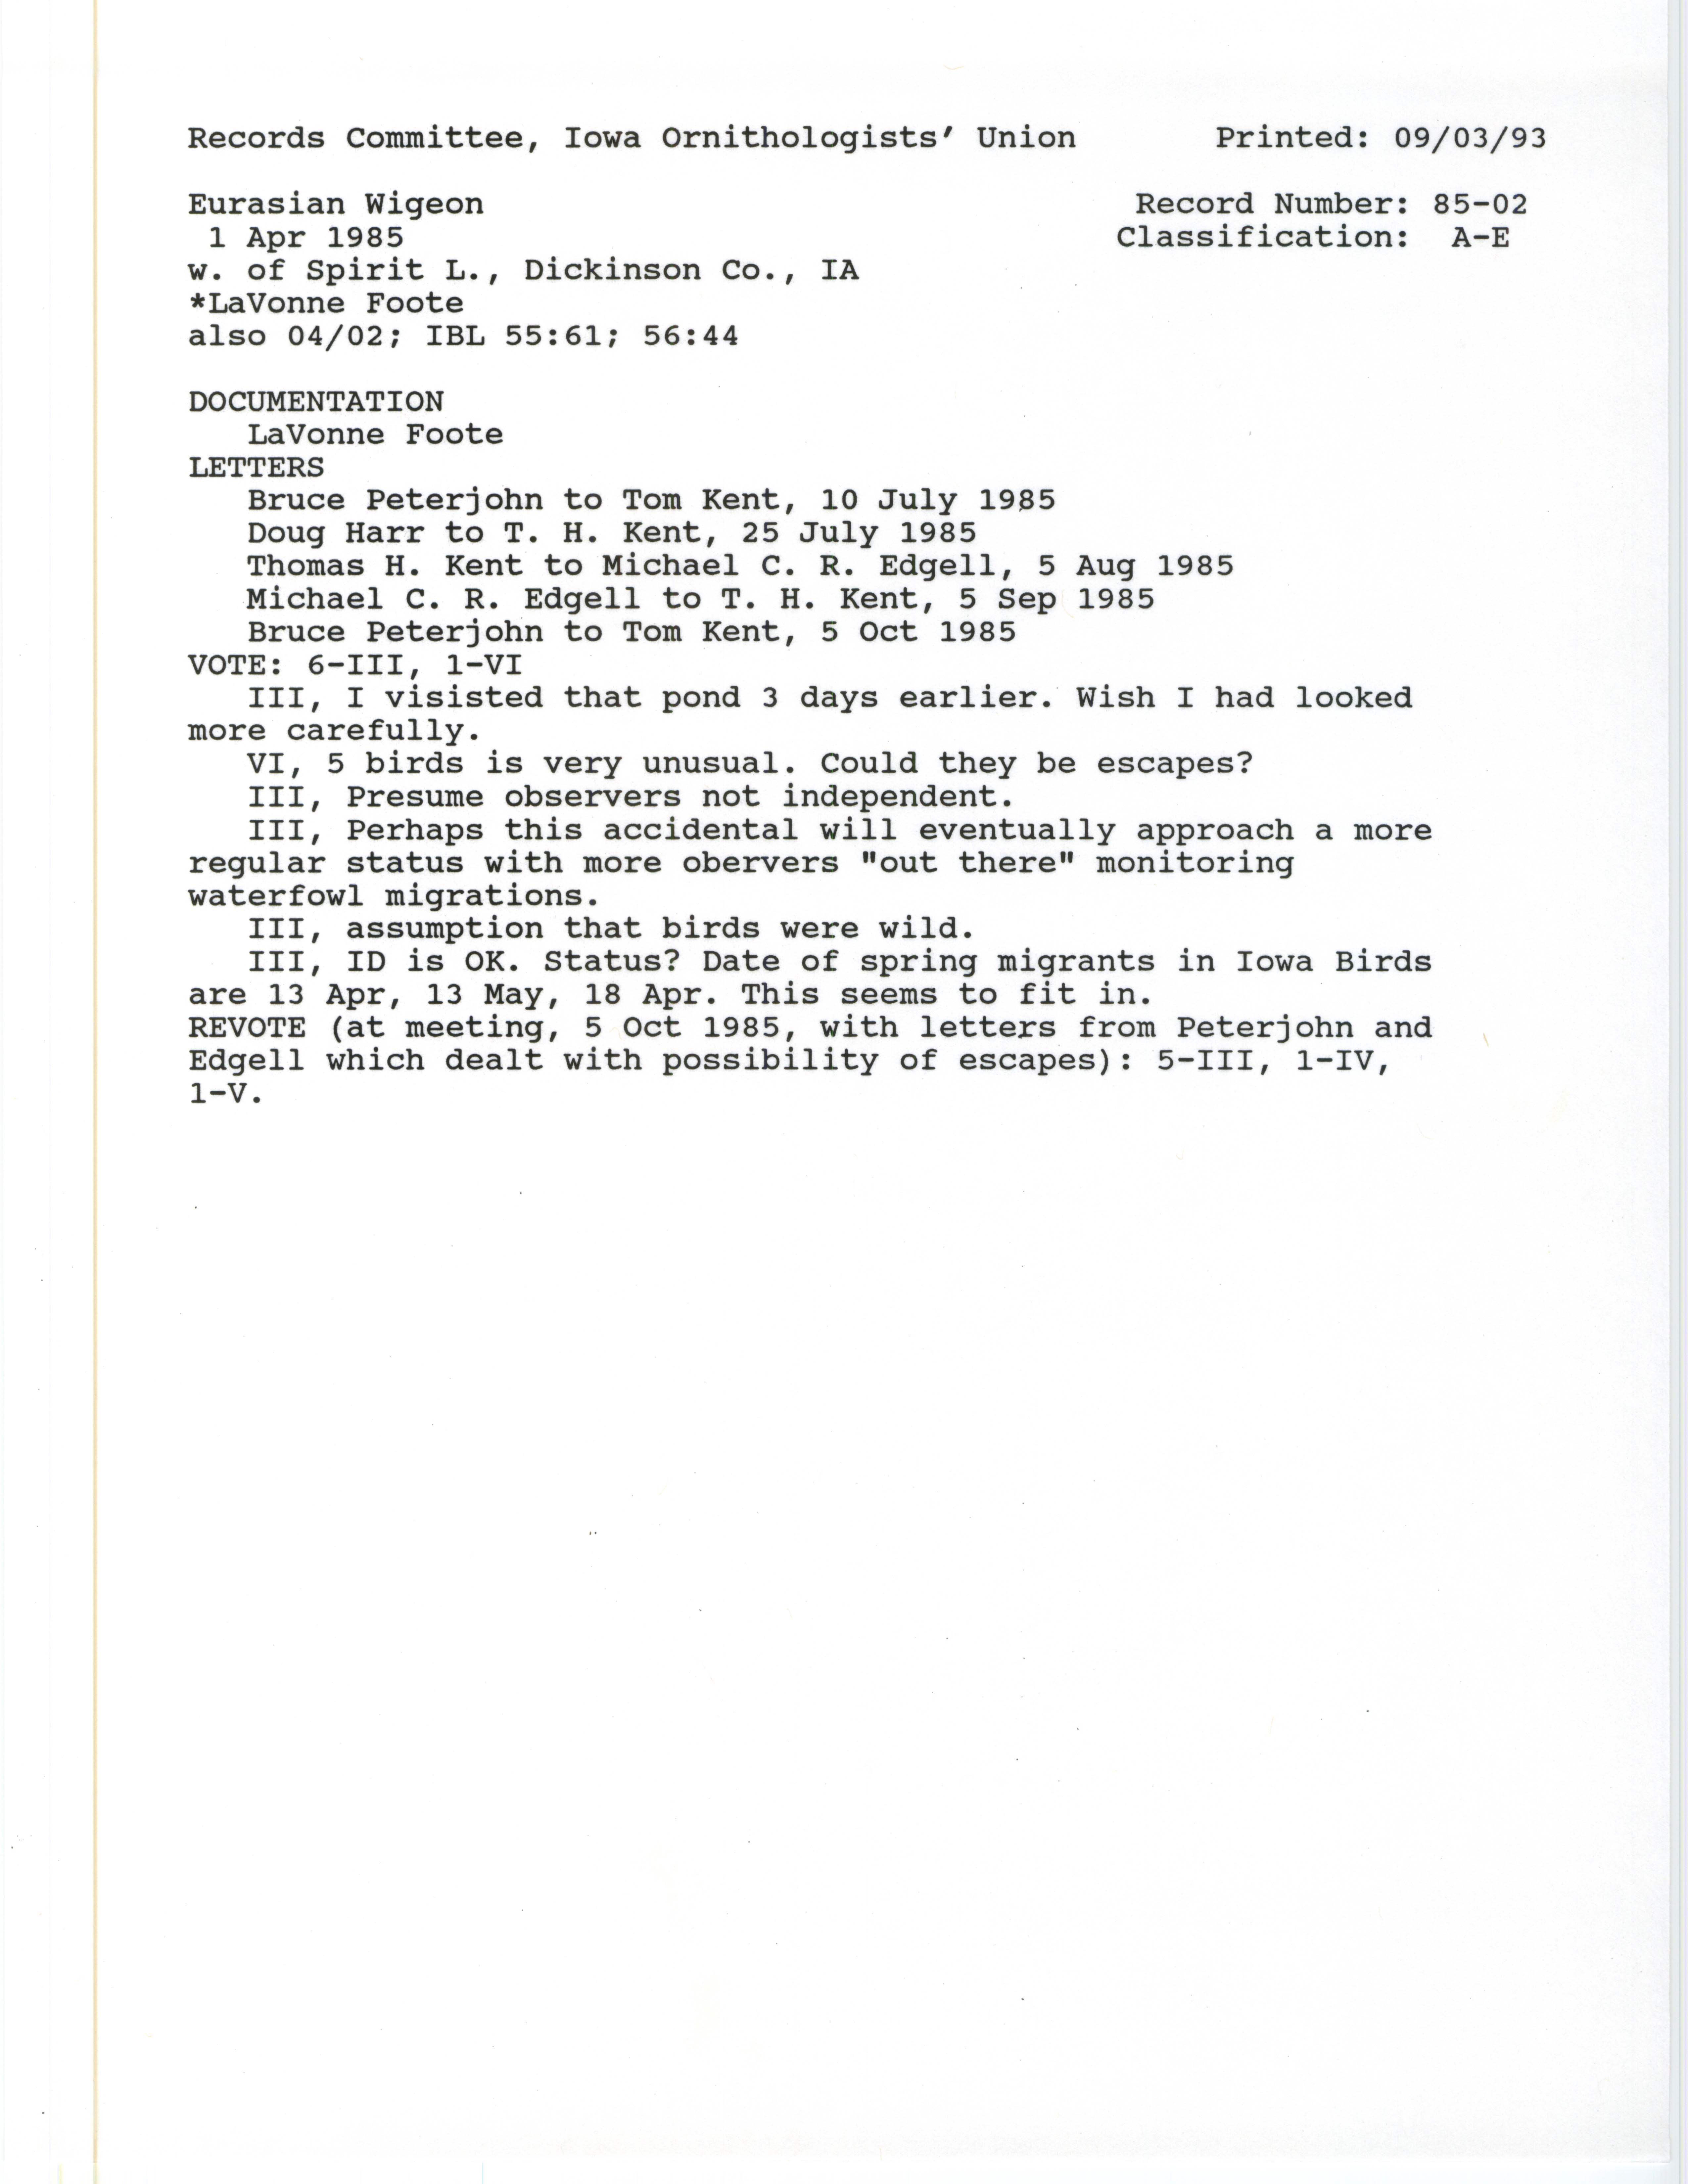 Records Committee review for rare bird sighting of Eurasian Wigeon at Spirit Lake, 1985